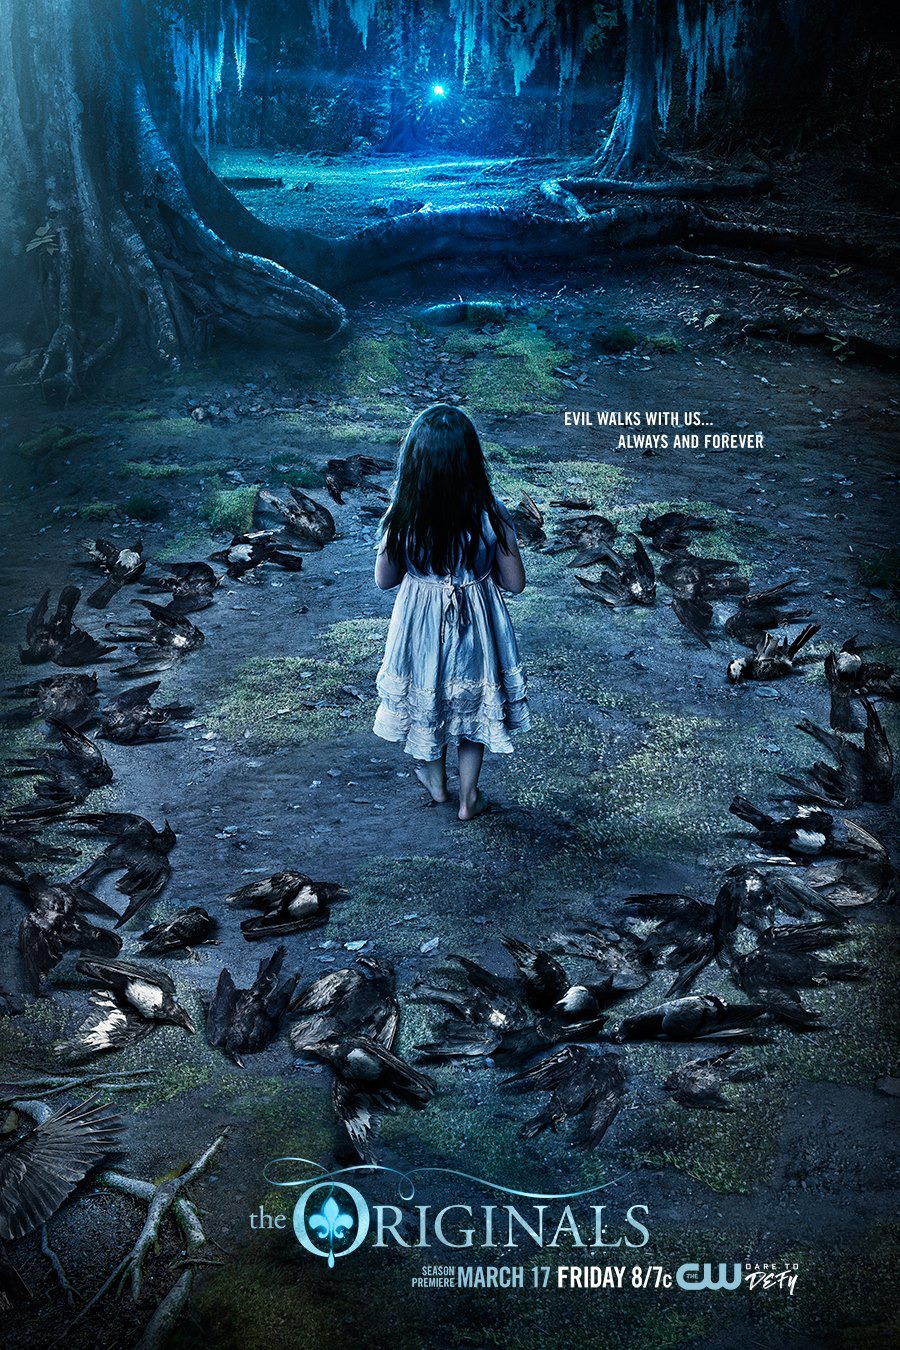 Extra Large Movie Poster Image for The Originals (#13 of 14)